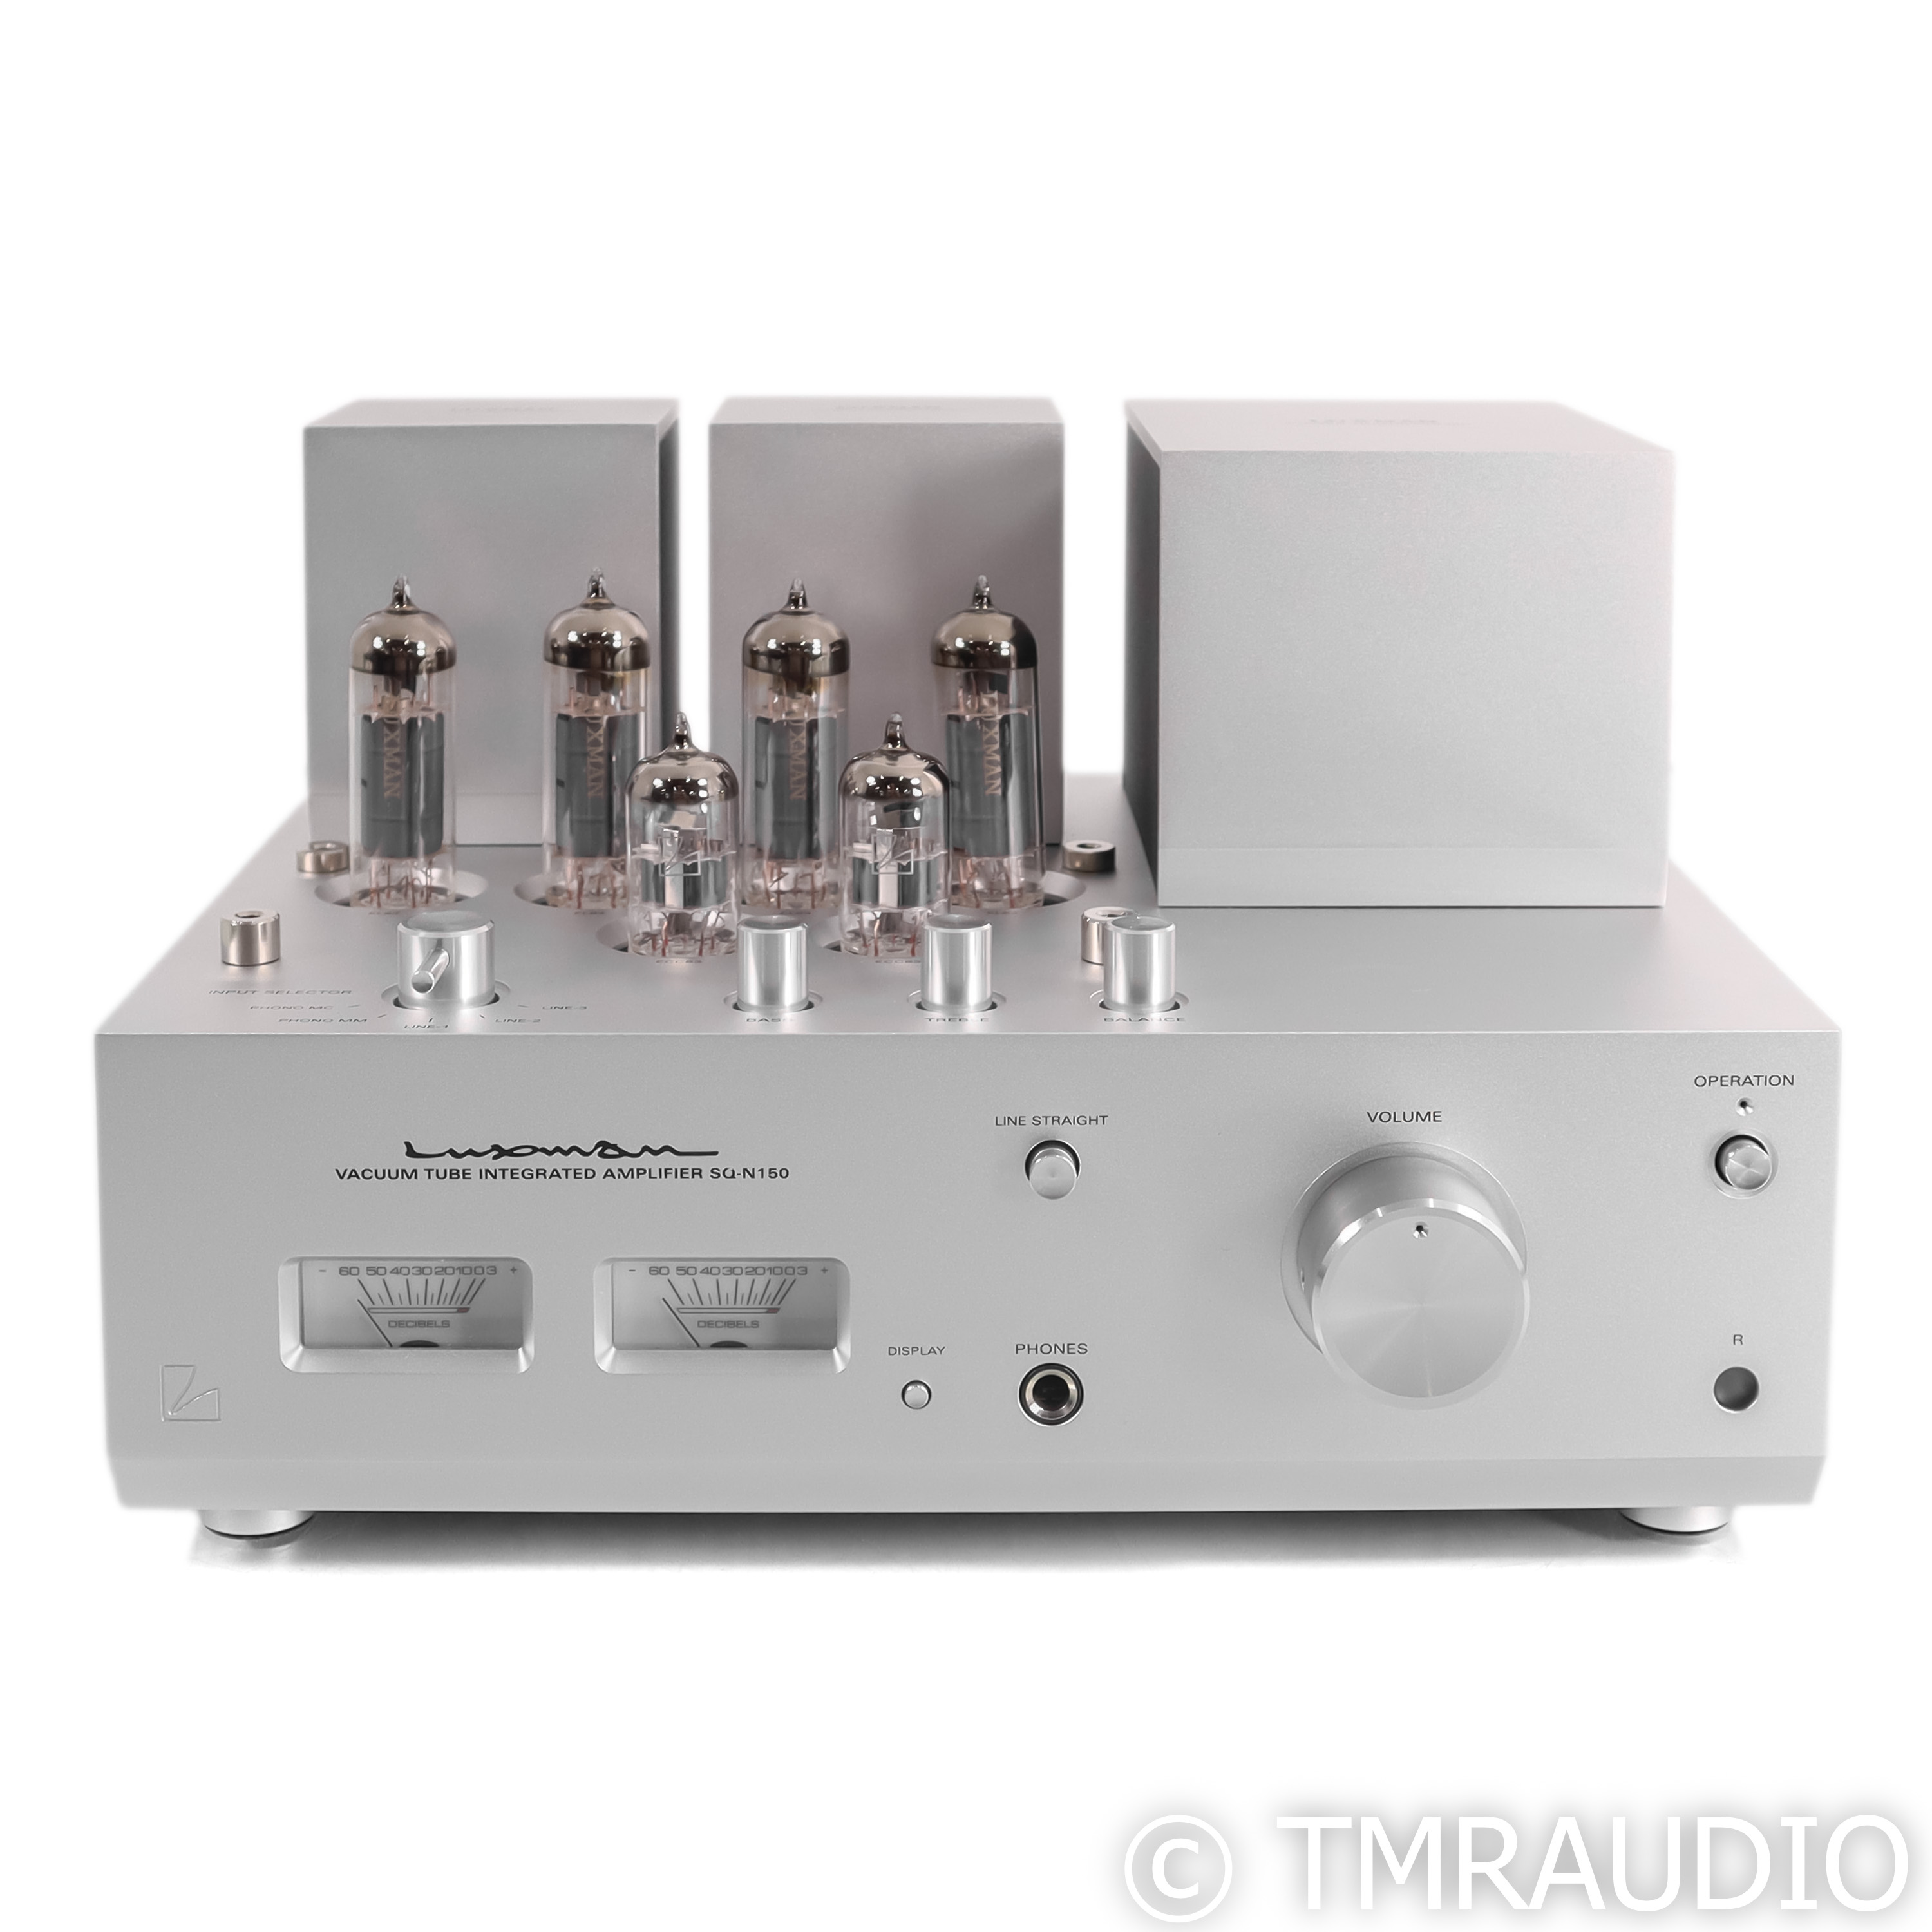 Luxman SQ-N150 Stereo Tube Integrated Amplifier